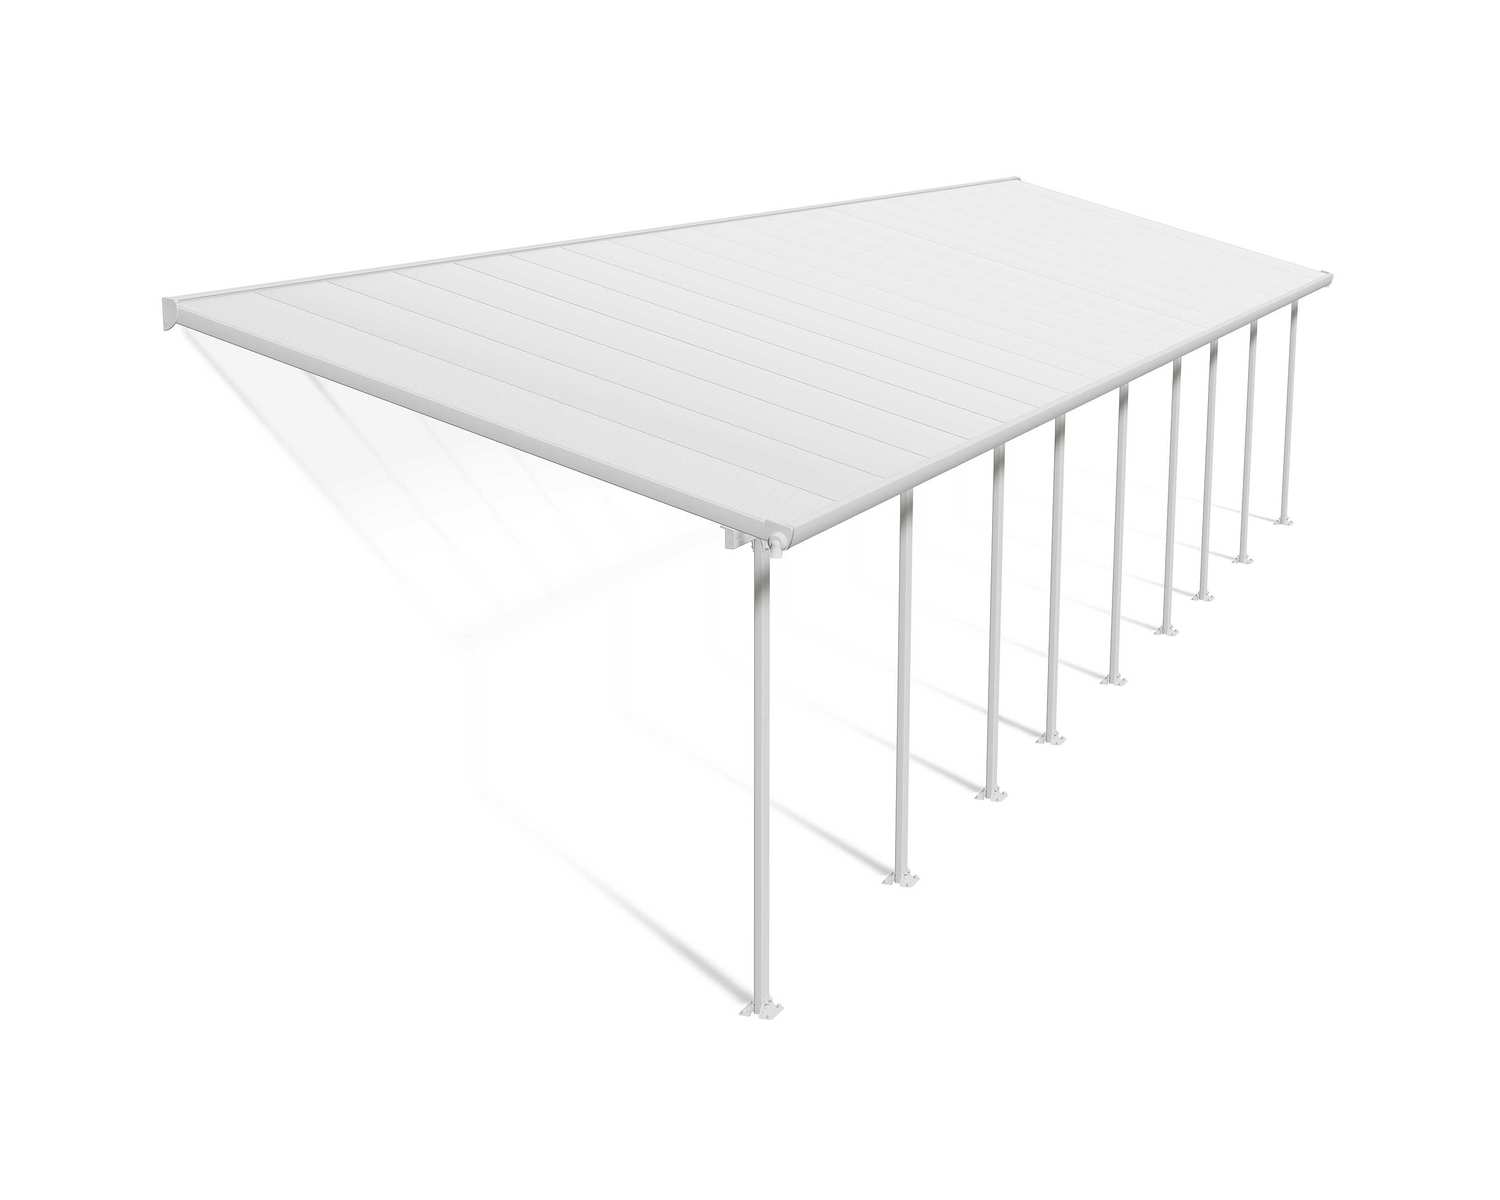 Patio Cover Kit Feria 3 ft. x 12.80 ft. White Structure & White Multi Wall Glazing